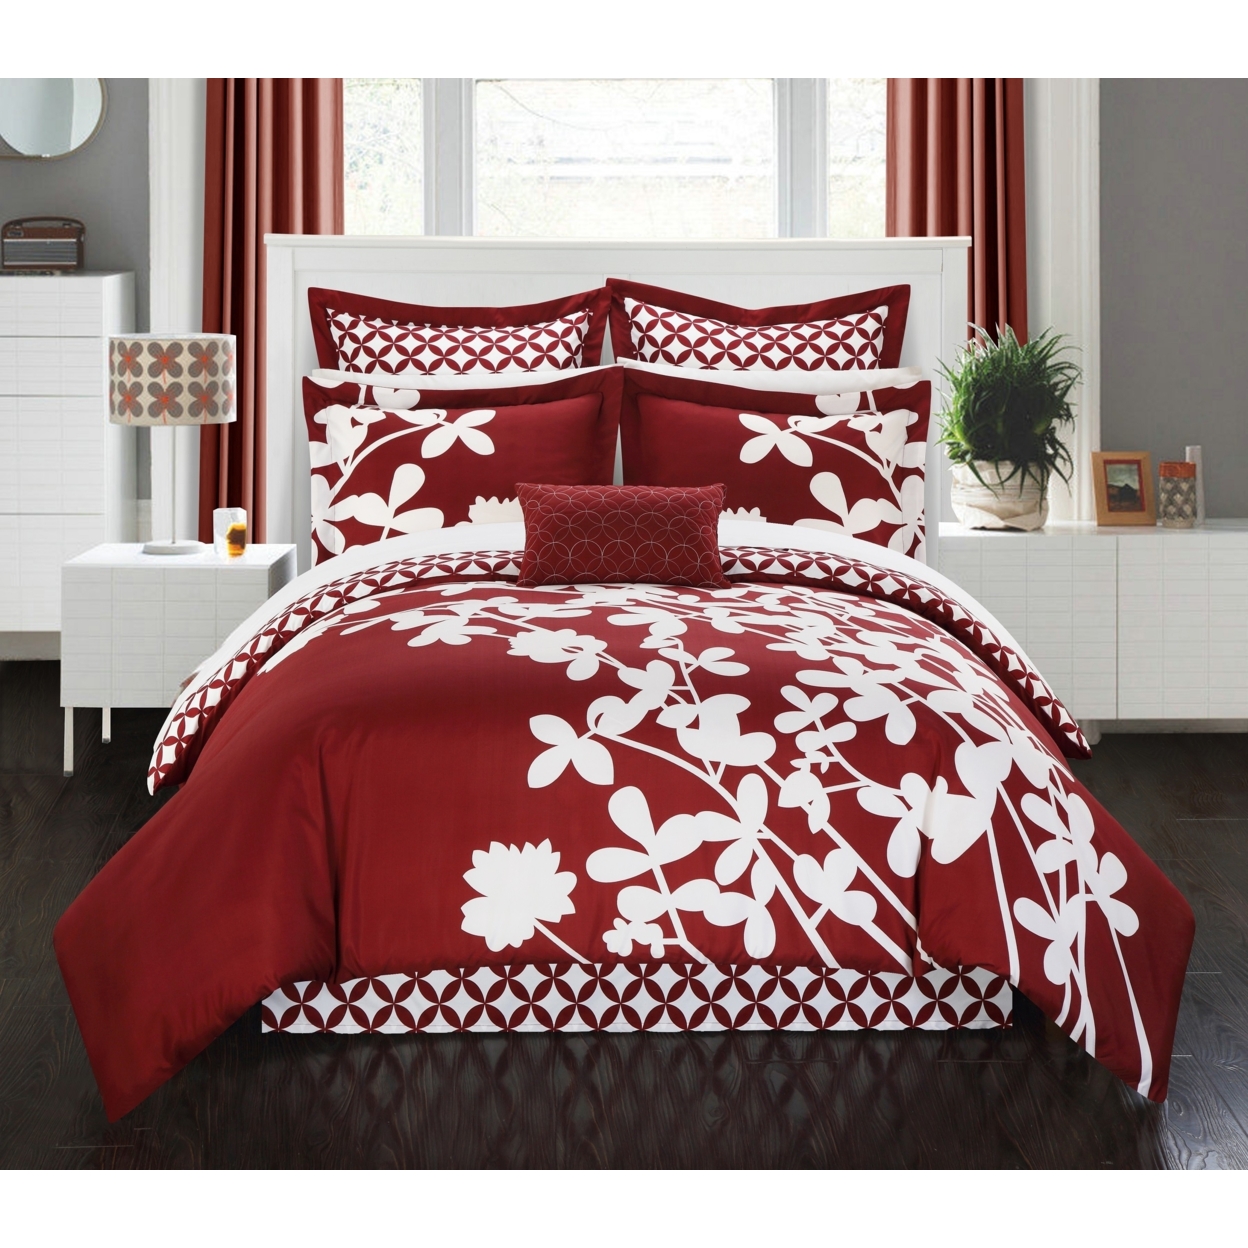 7 Piece Sire Reversible Large Scale Floral Design Printed With Diamond Pattern Reverse Comforter - Turquoise, Queen